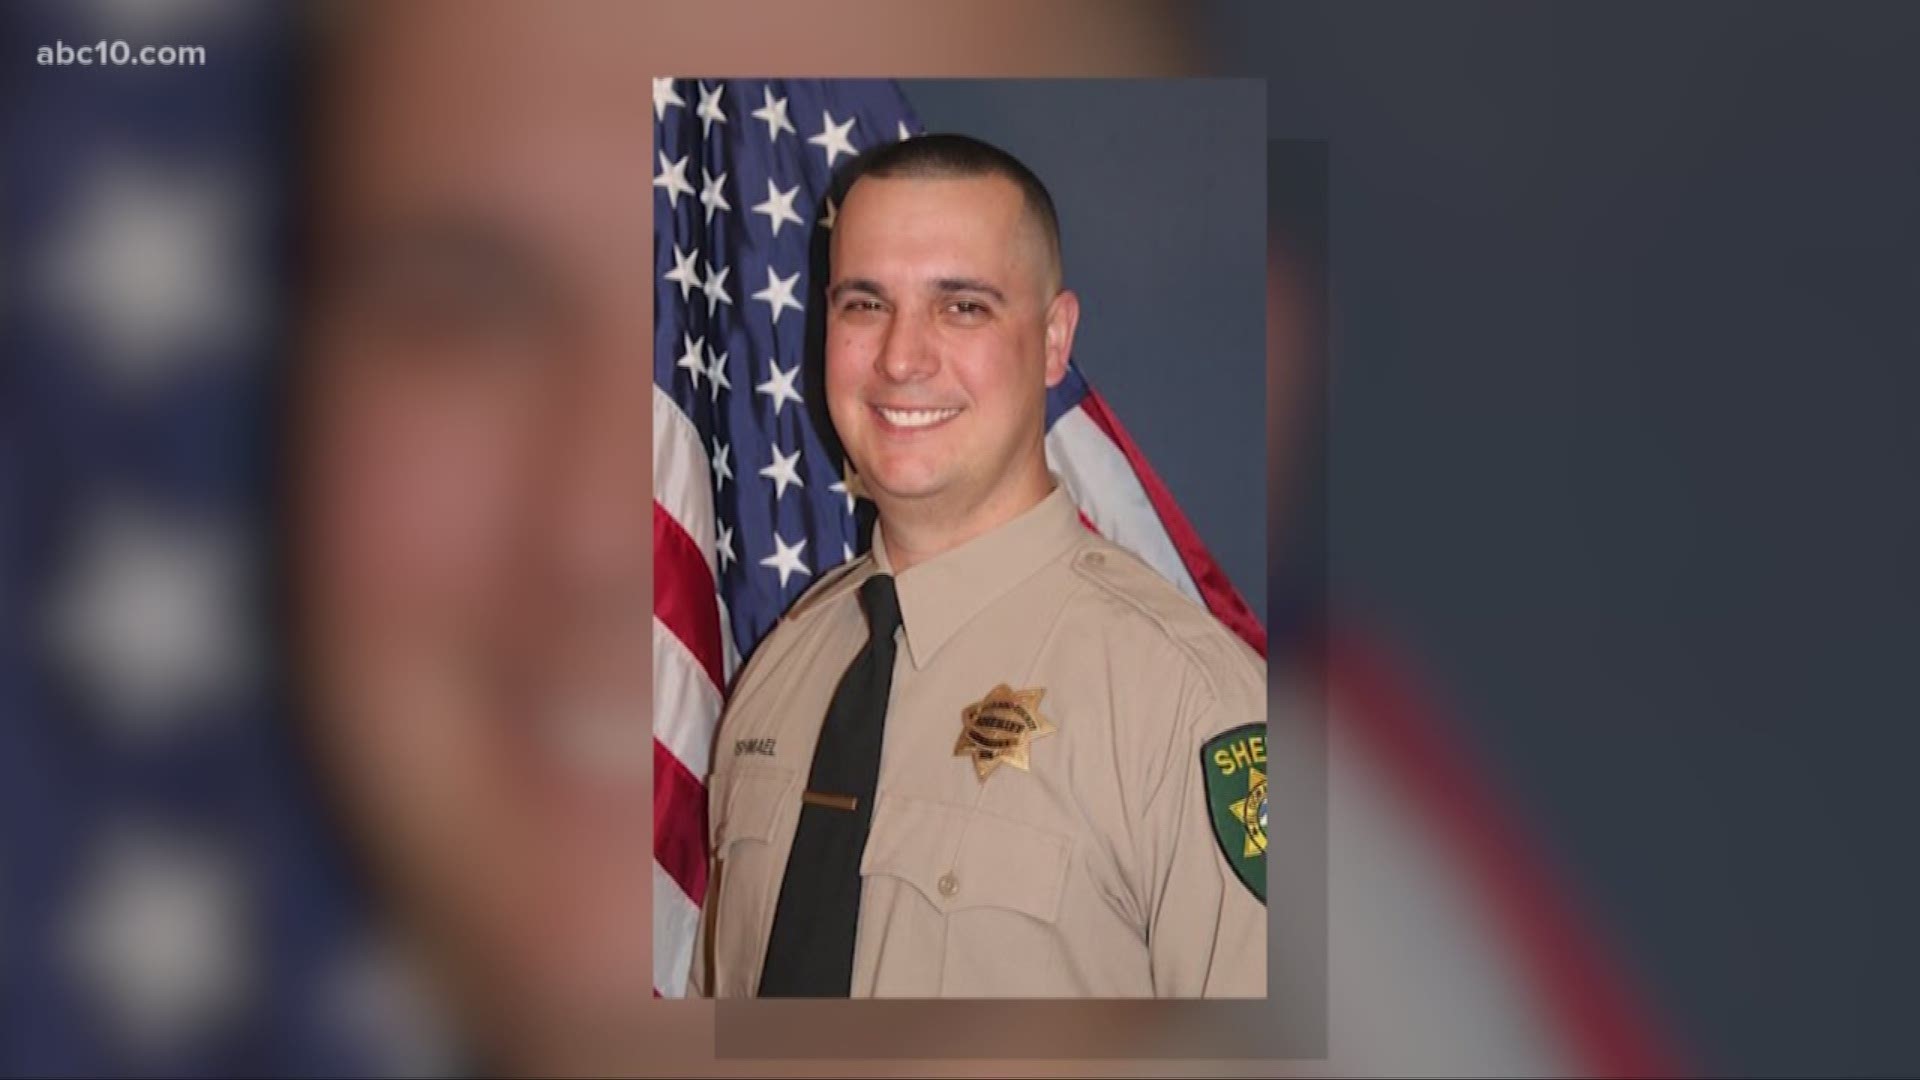 Deputy Brian Ishmael was a four-year veteran with the sheriff's office and previously worked for the Placerville Police Department.